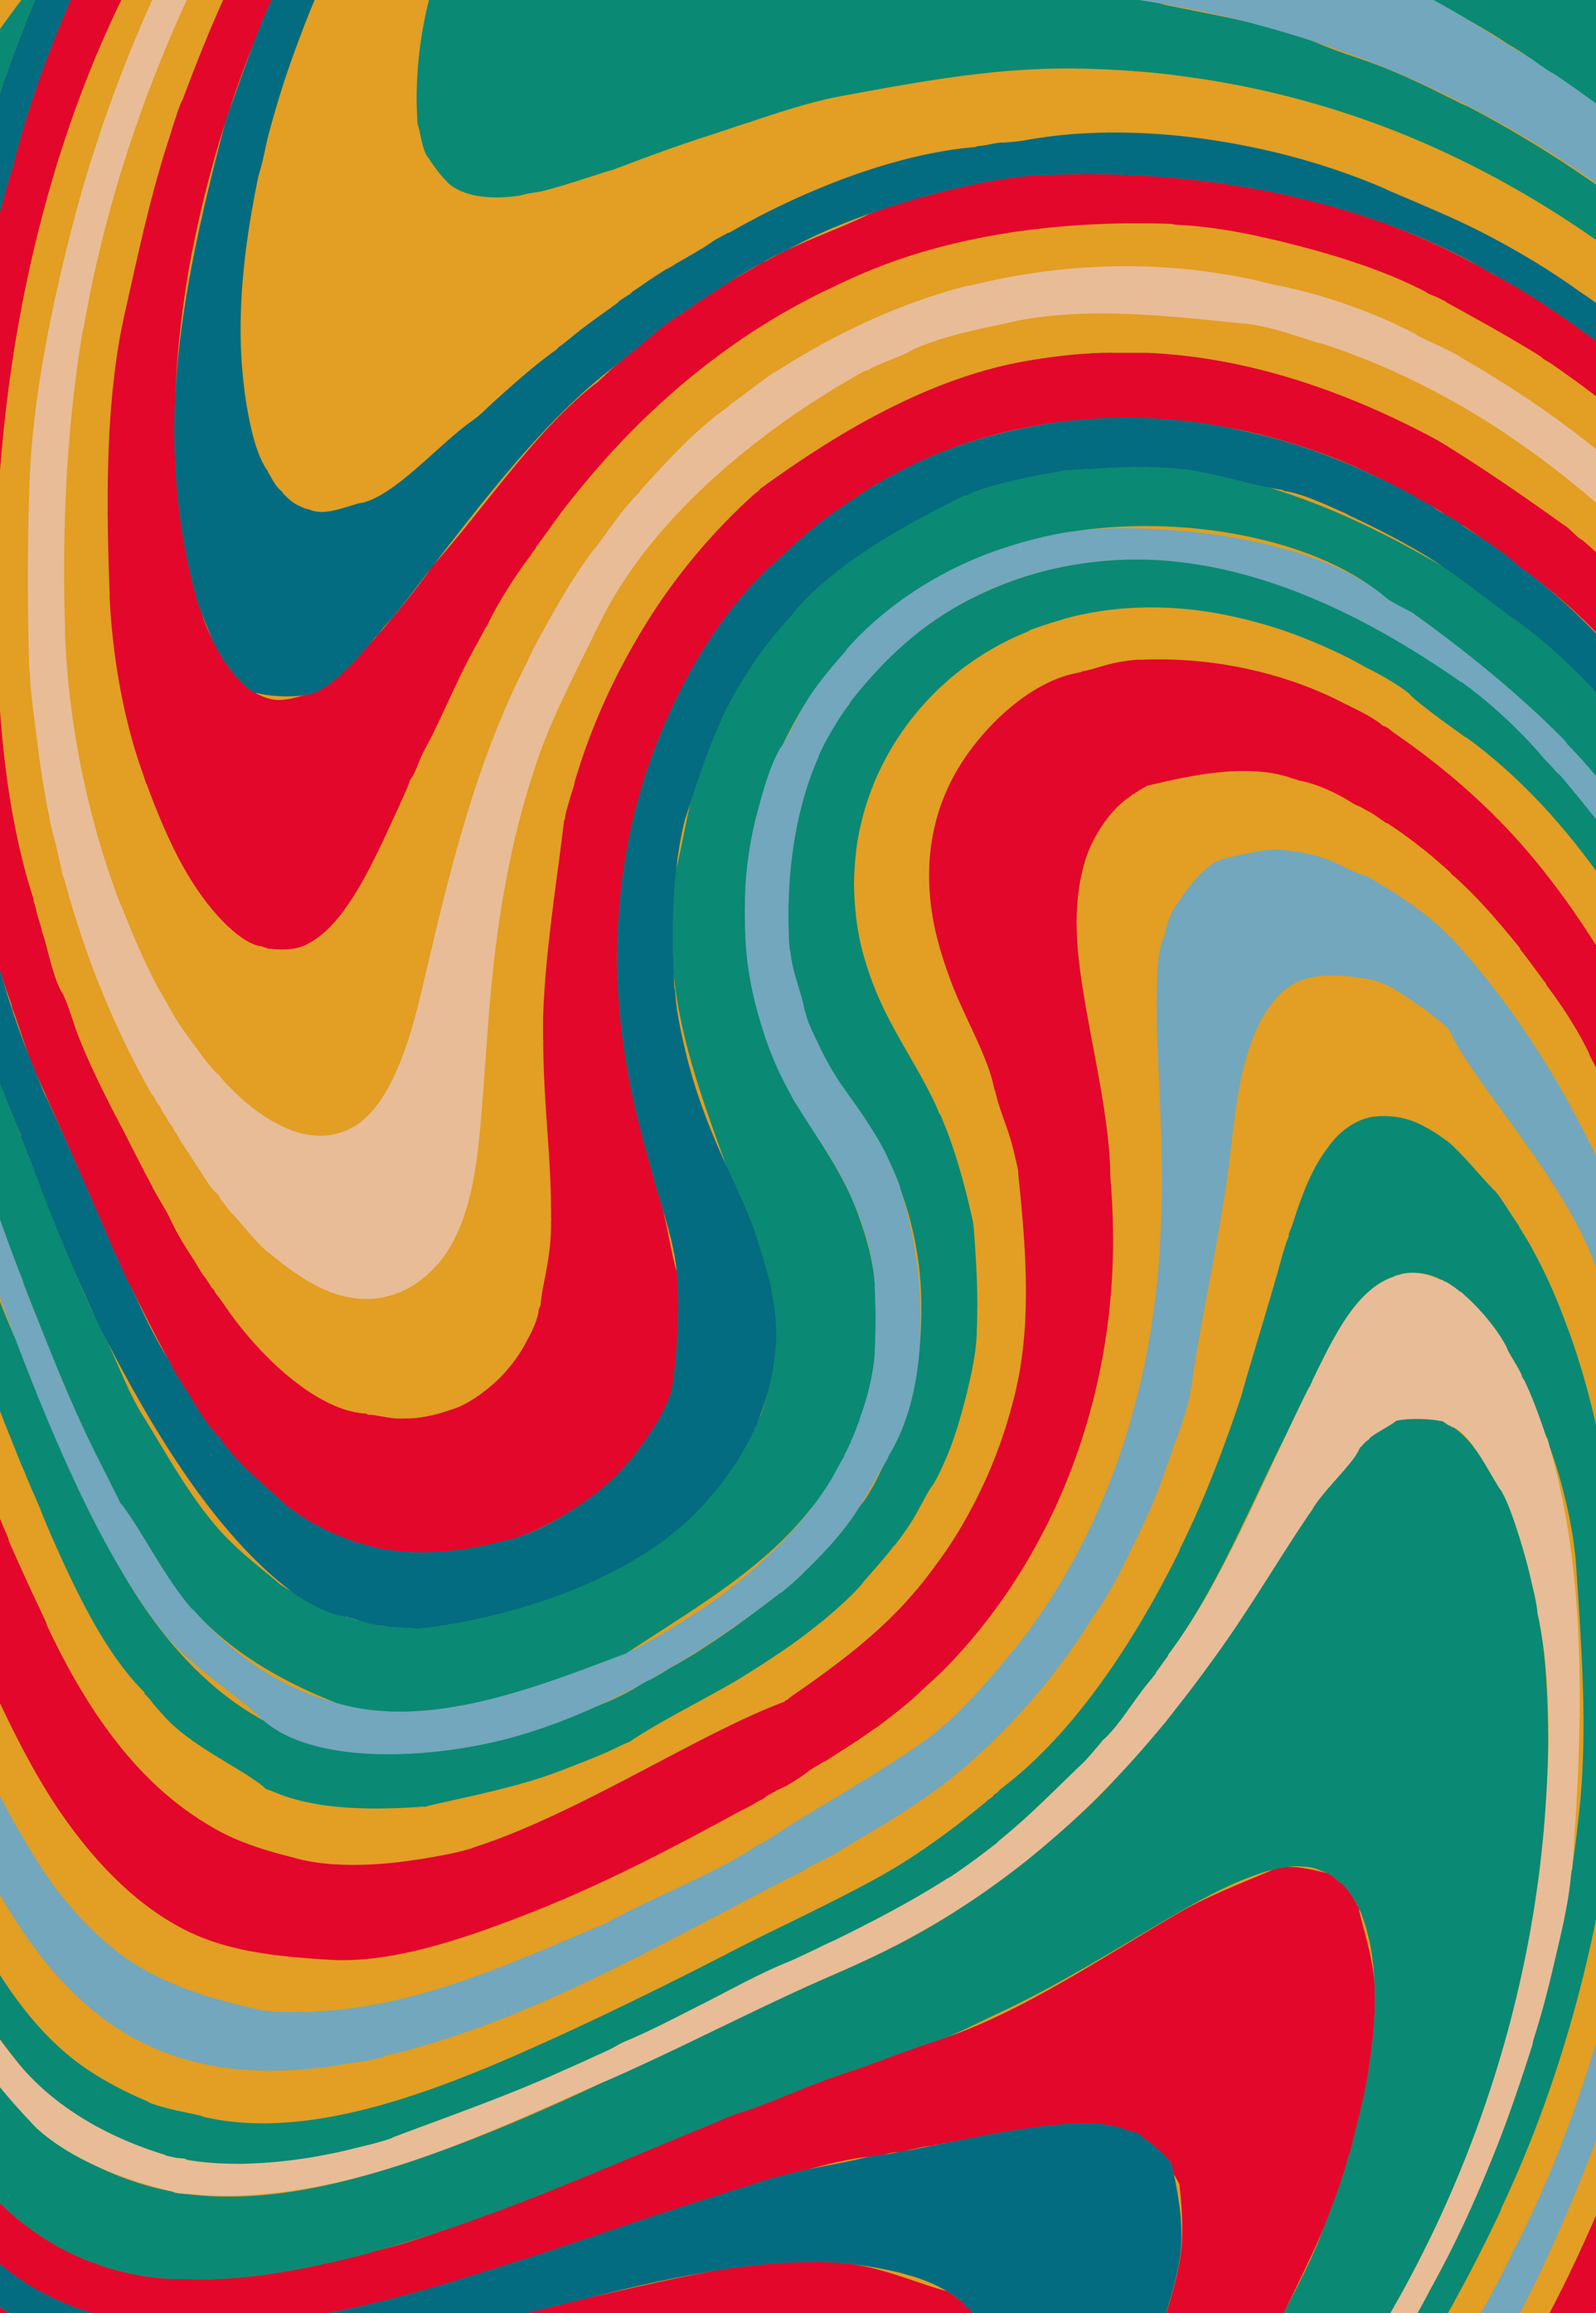 Retro groovy psychedelic marble background